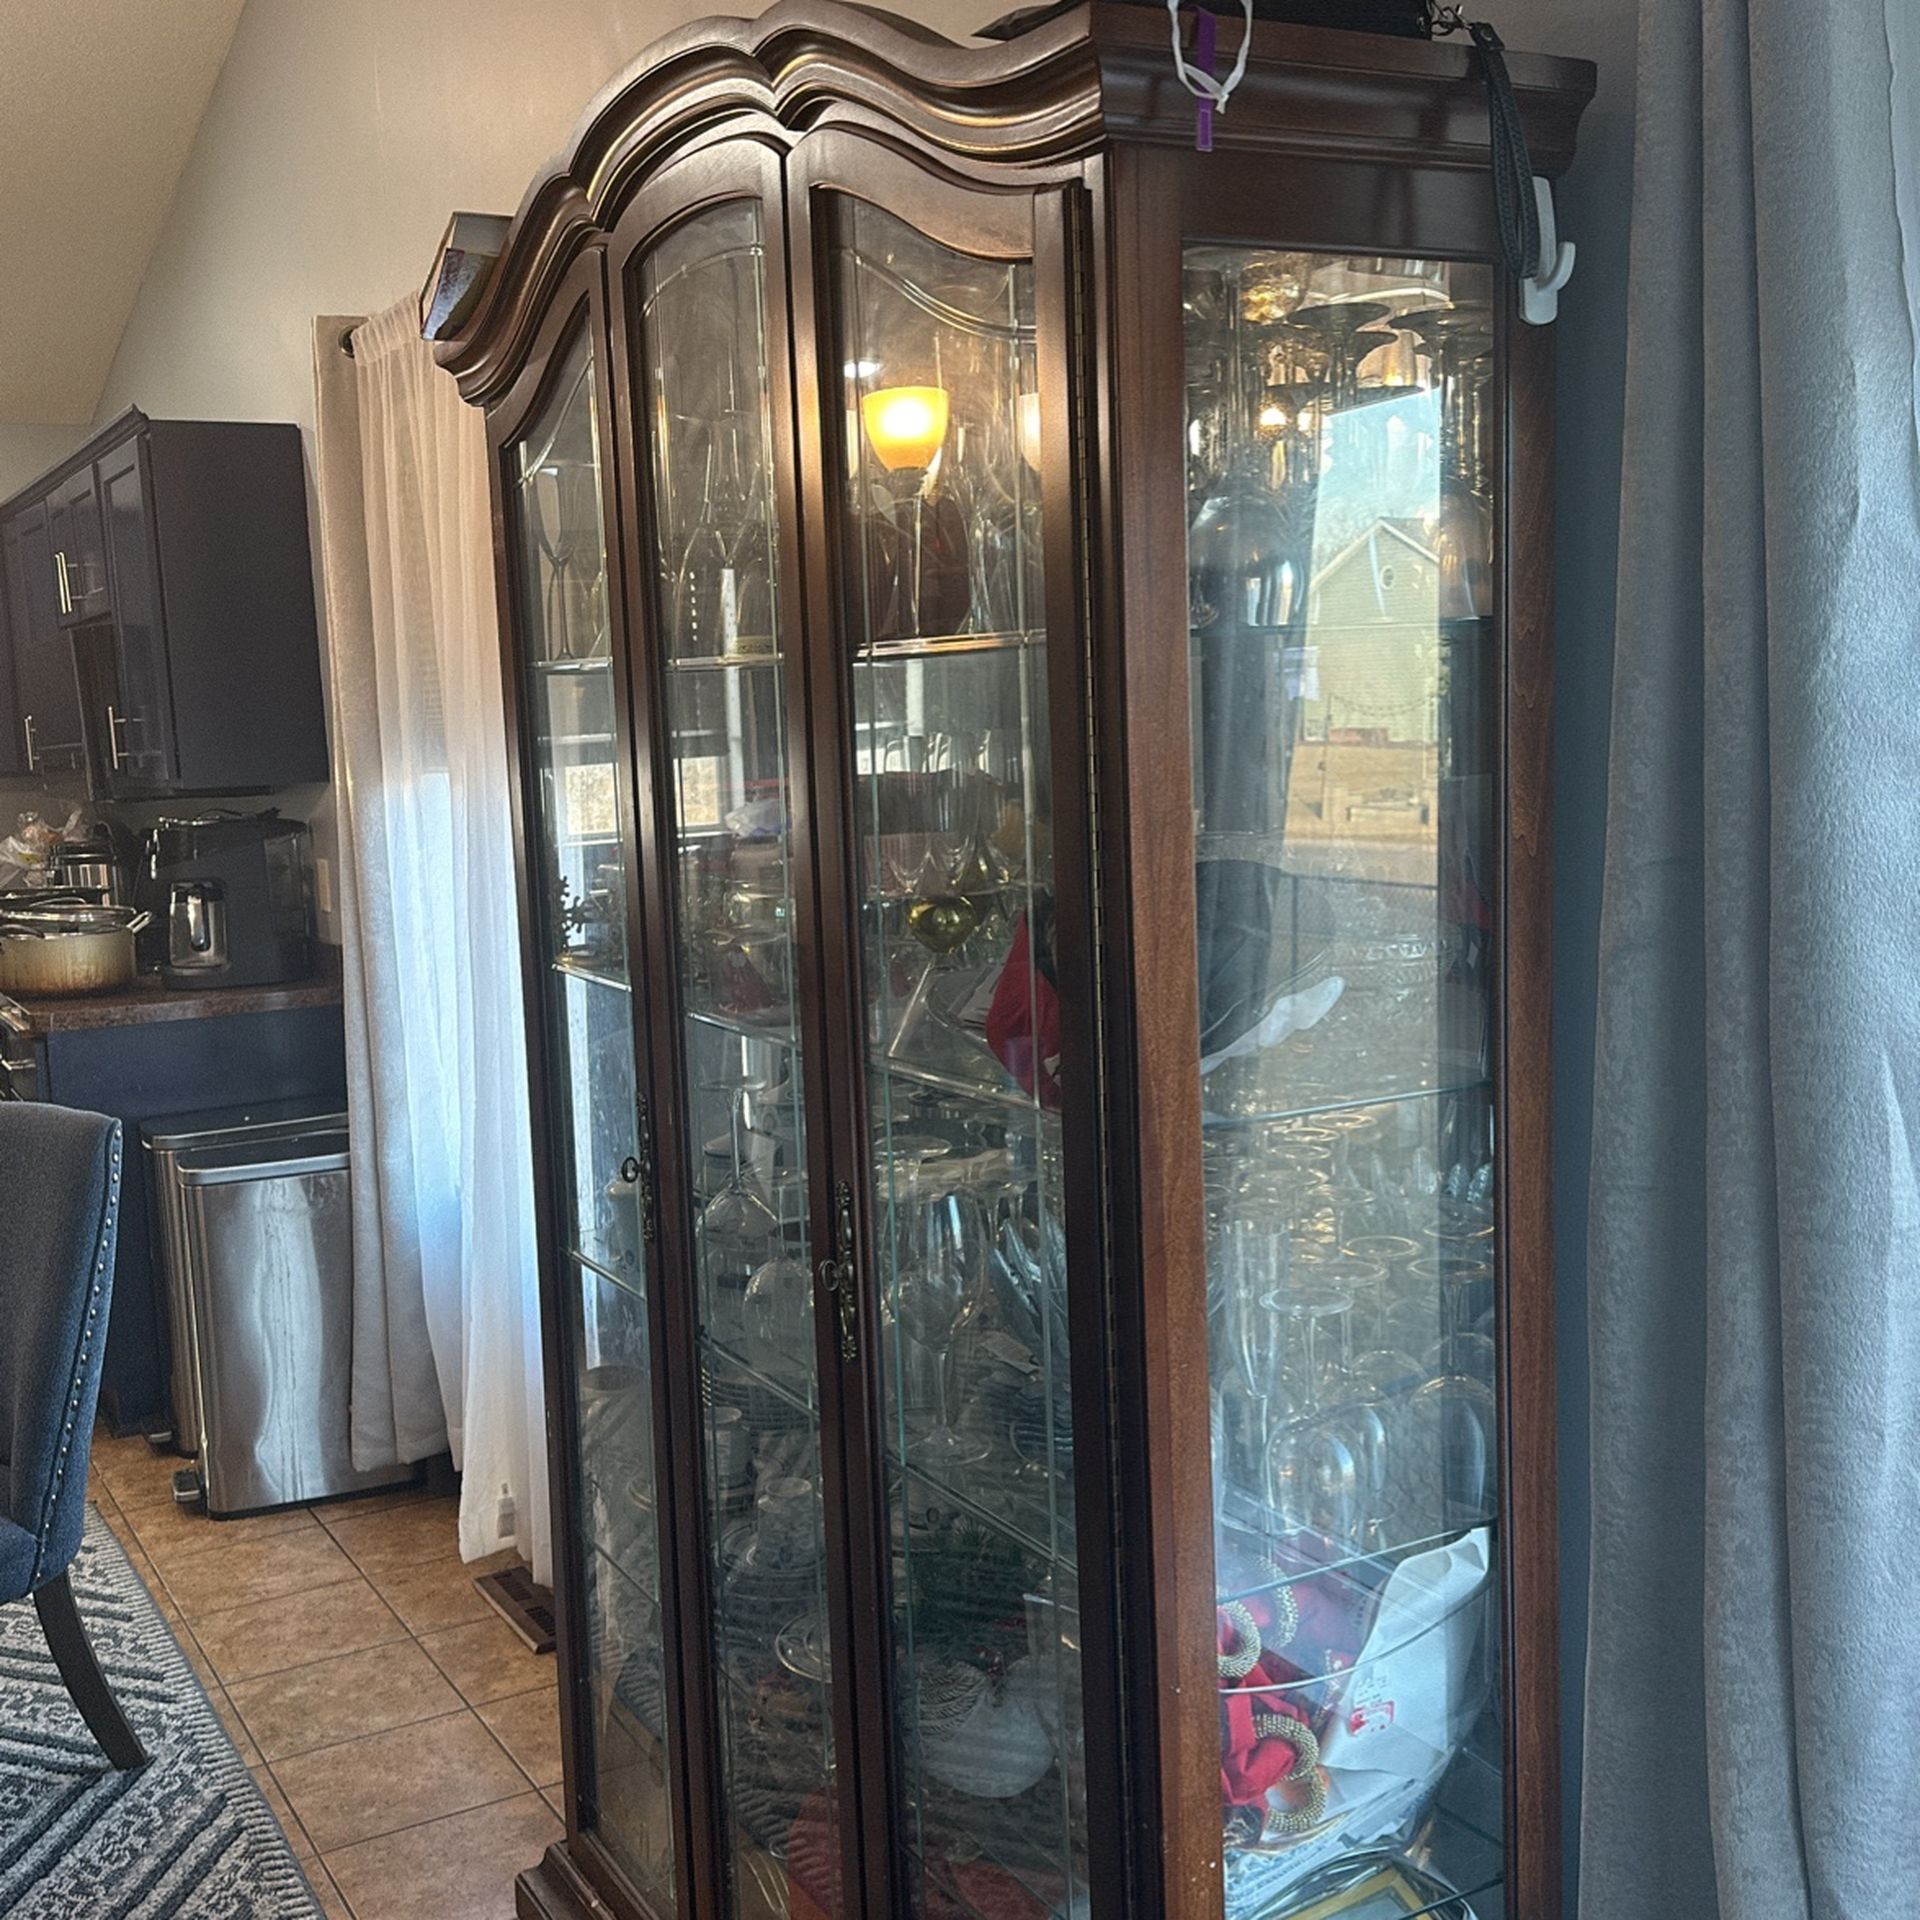 Wooden Glass Display Case